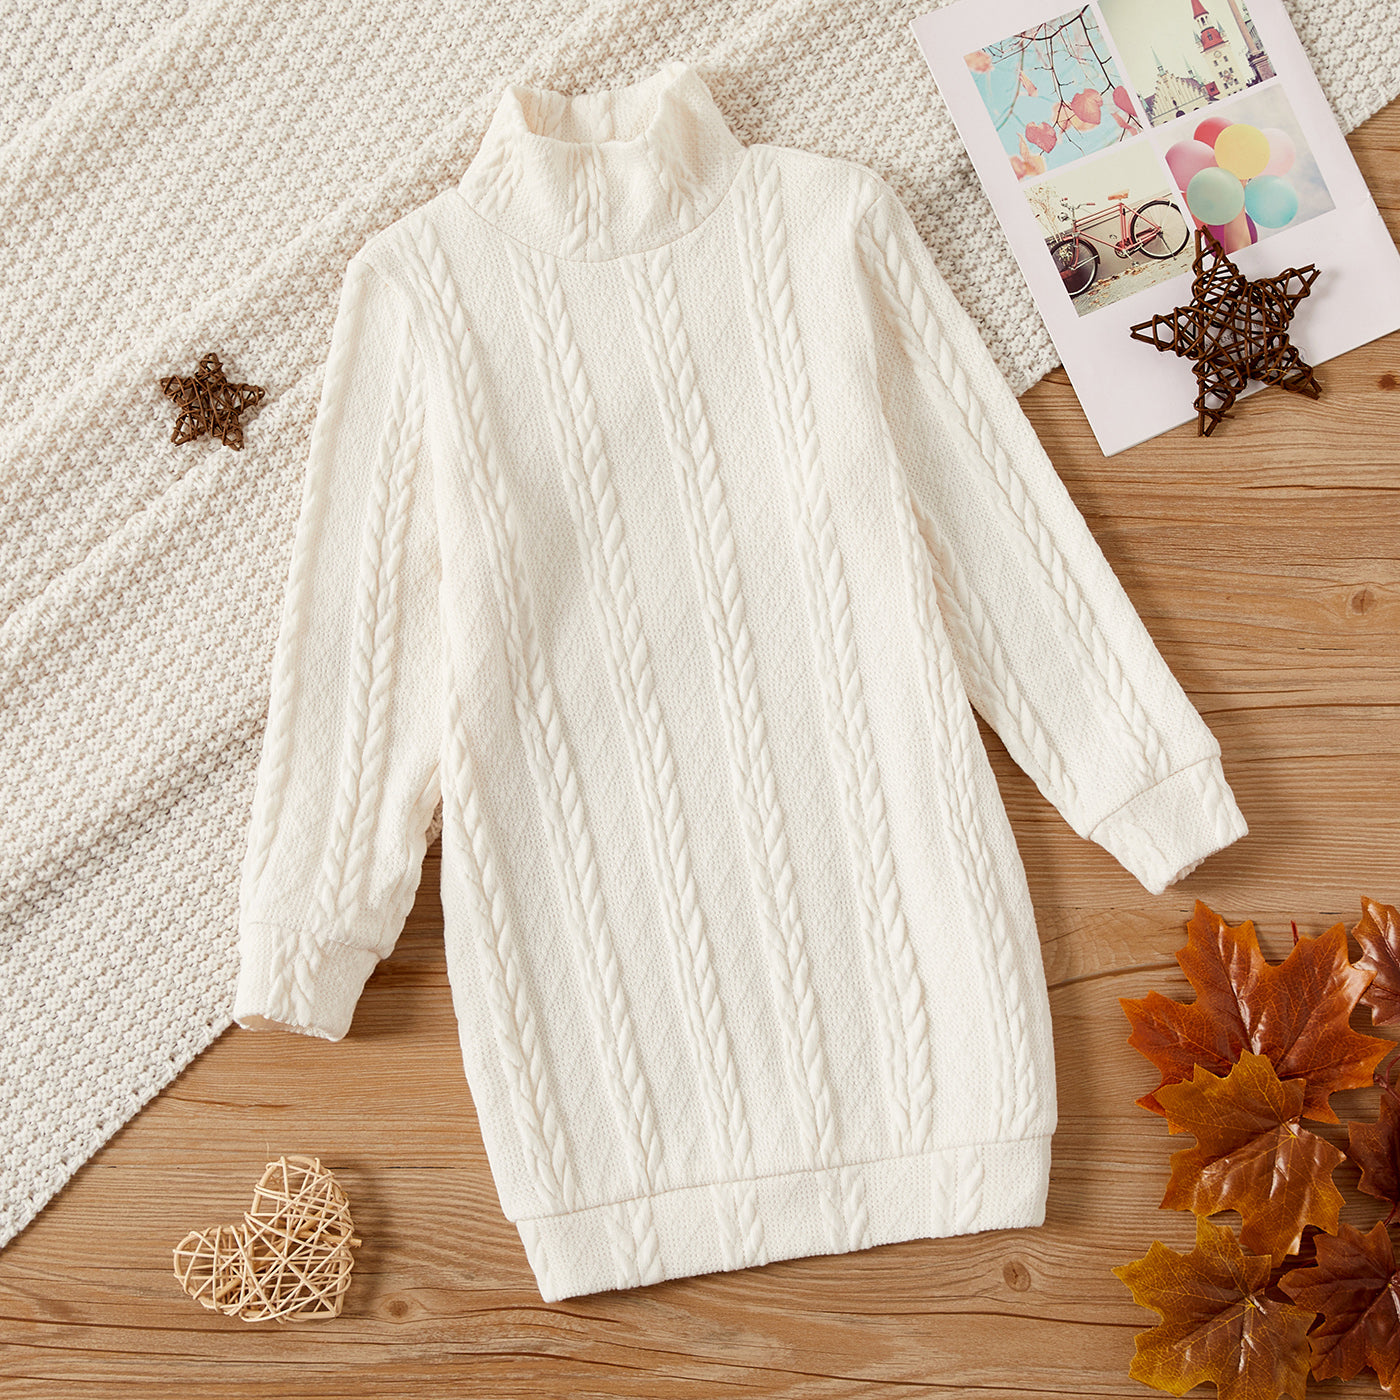 Kid Girl Solid Color Cable Knit Textured Mock neck Sweater Dress